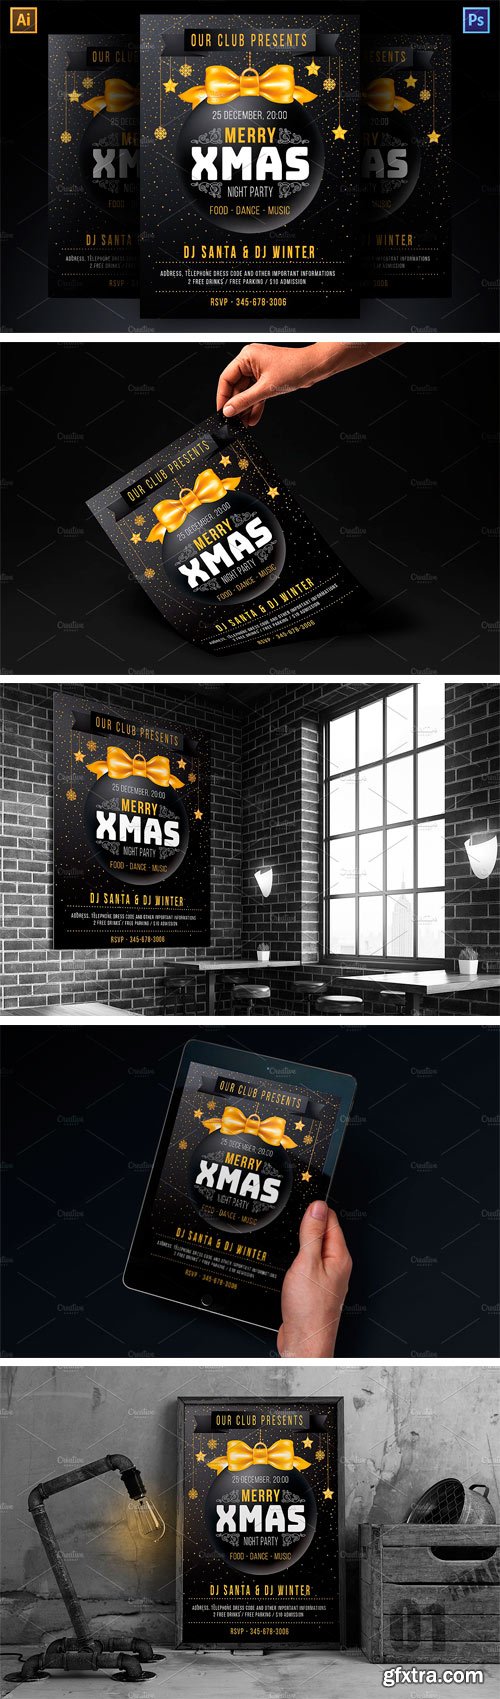 CM - Template For Xmas Party 2054184